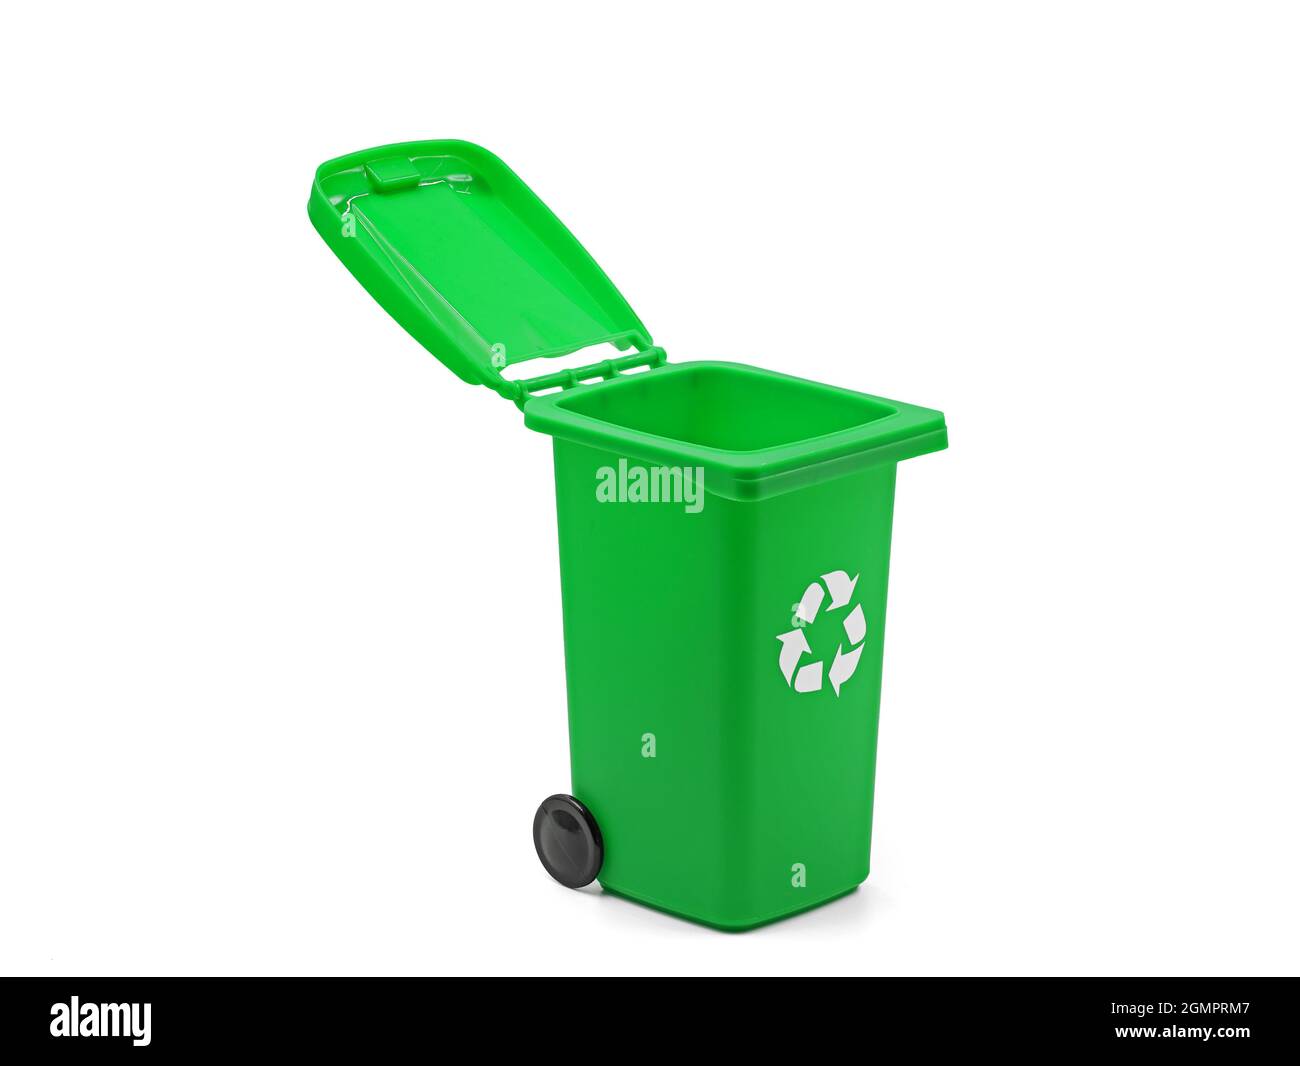 green half-opened recycle bin isolated on white background Stock Photo